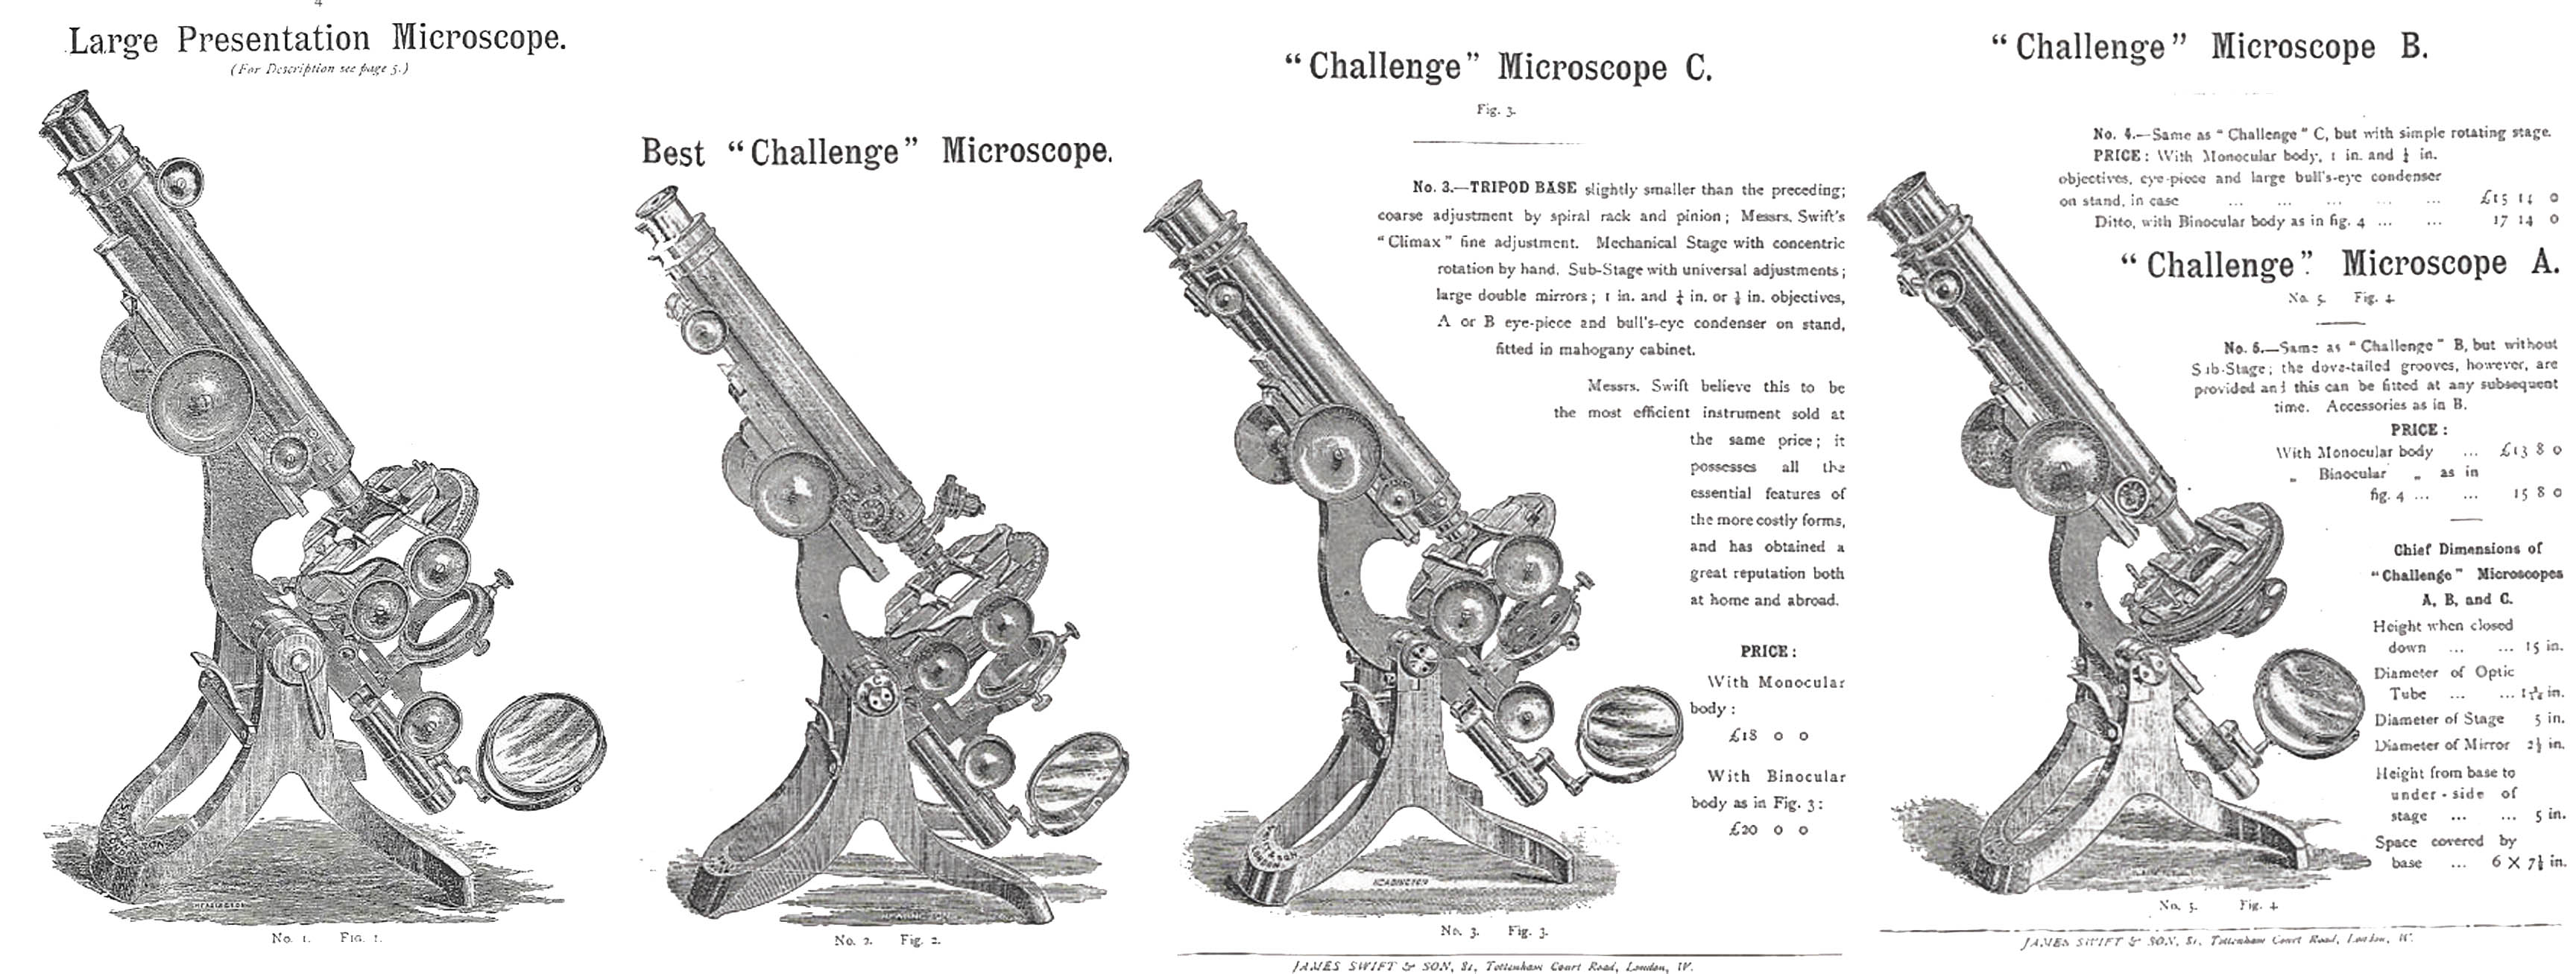 swift and presentation microscopes of 1892